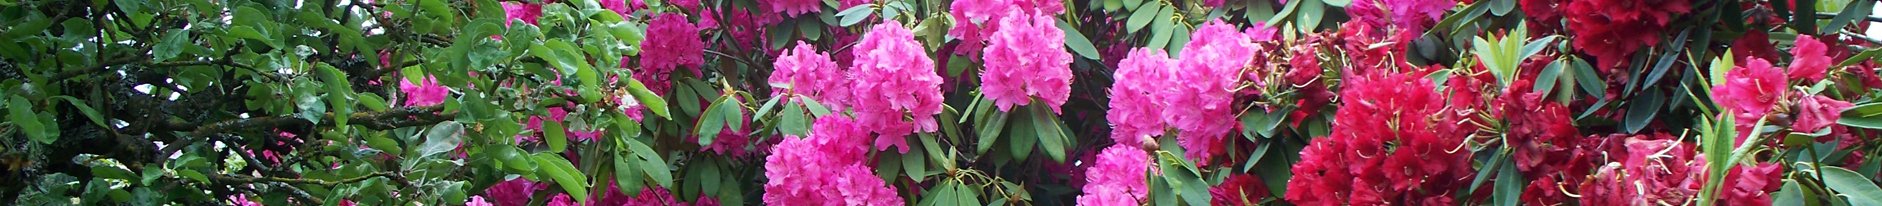 Rhododendron Flower Tour India